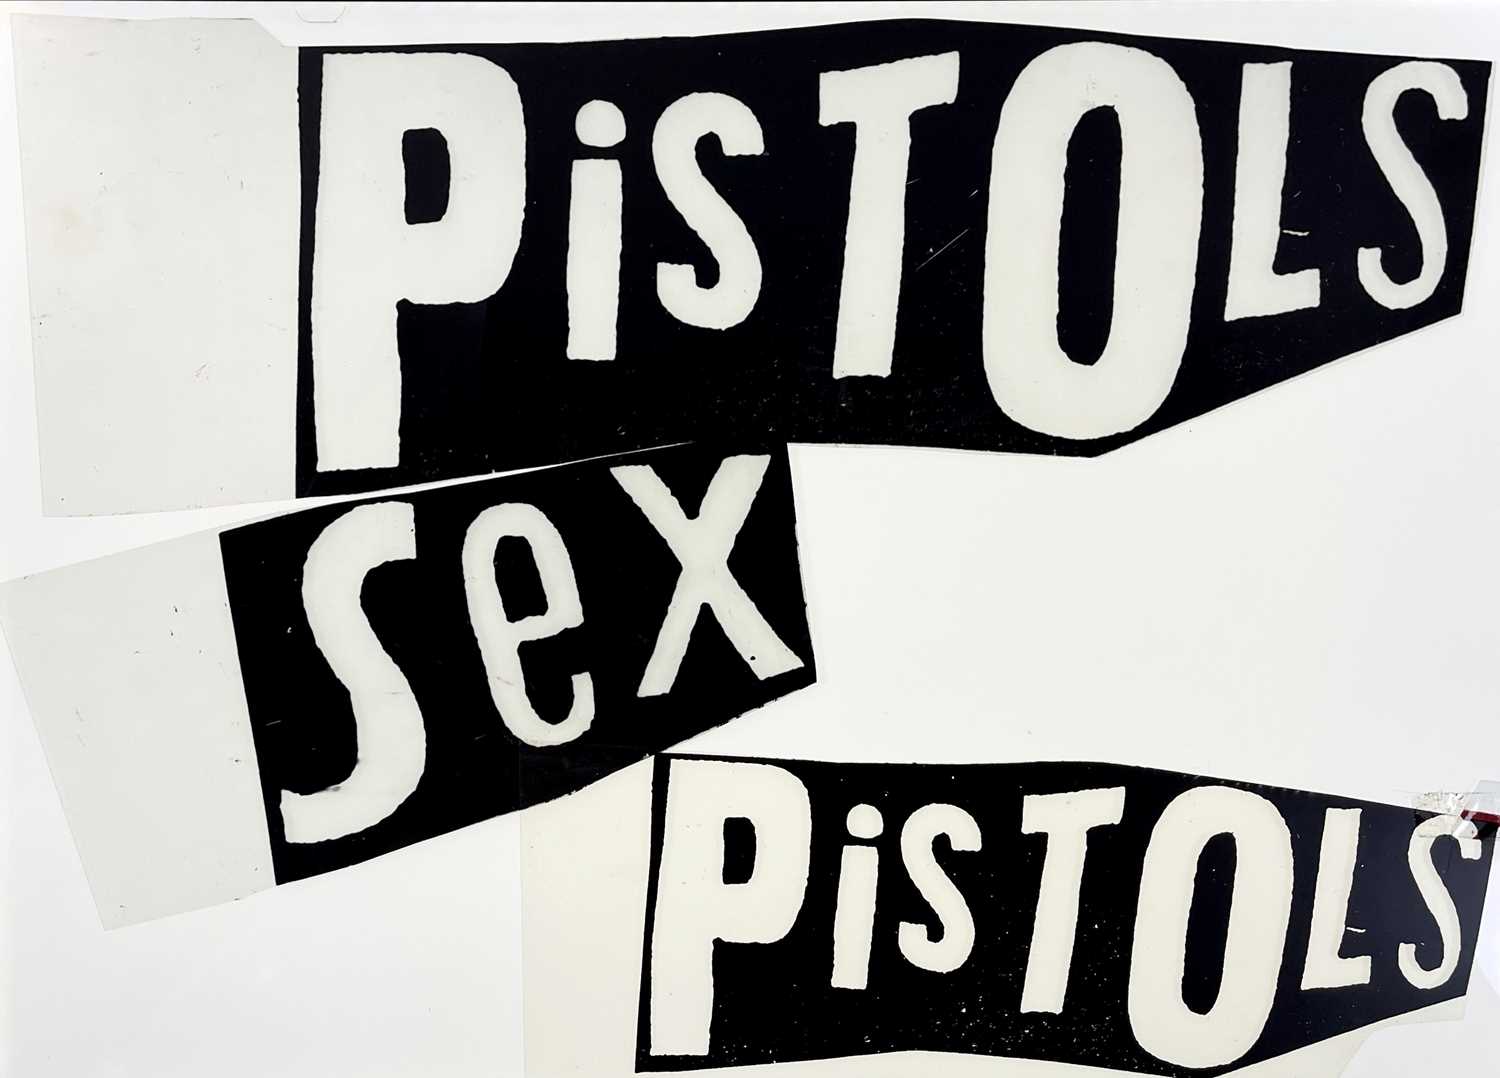 Sex Pistols Booklet by AzzL - Issuu